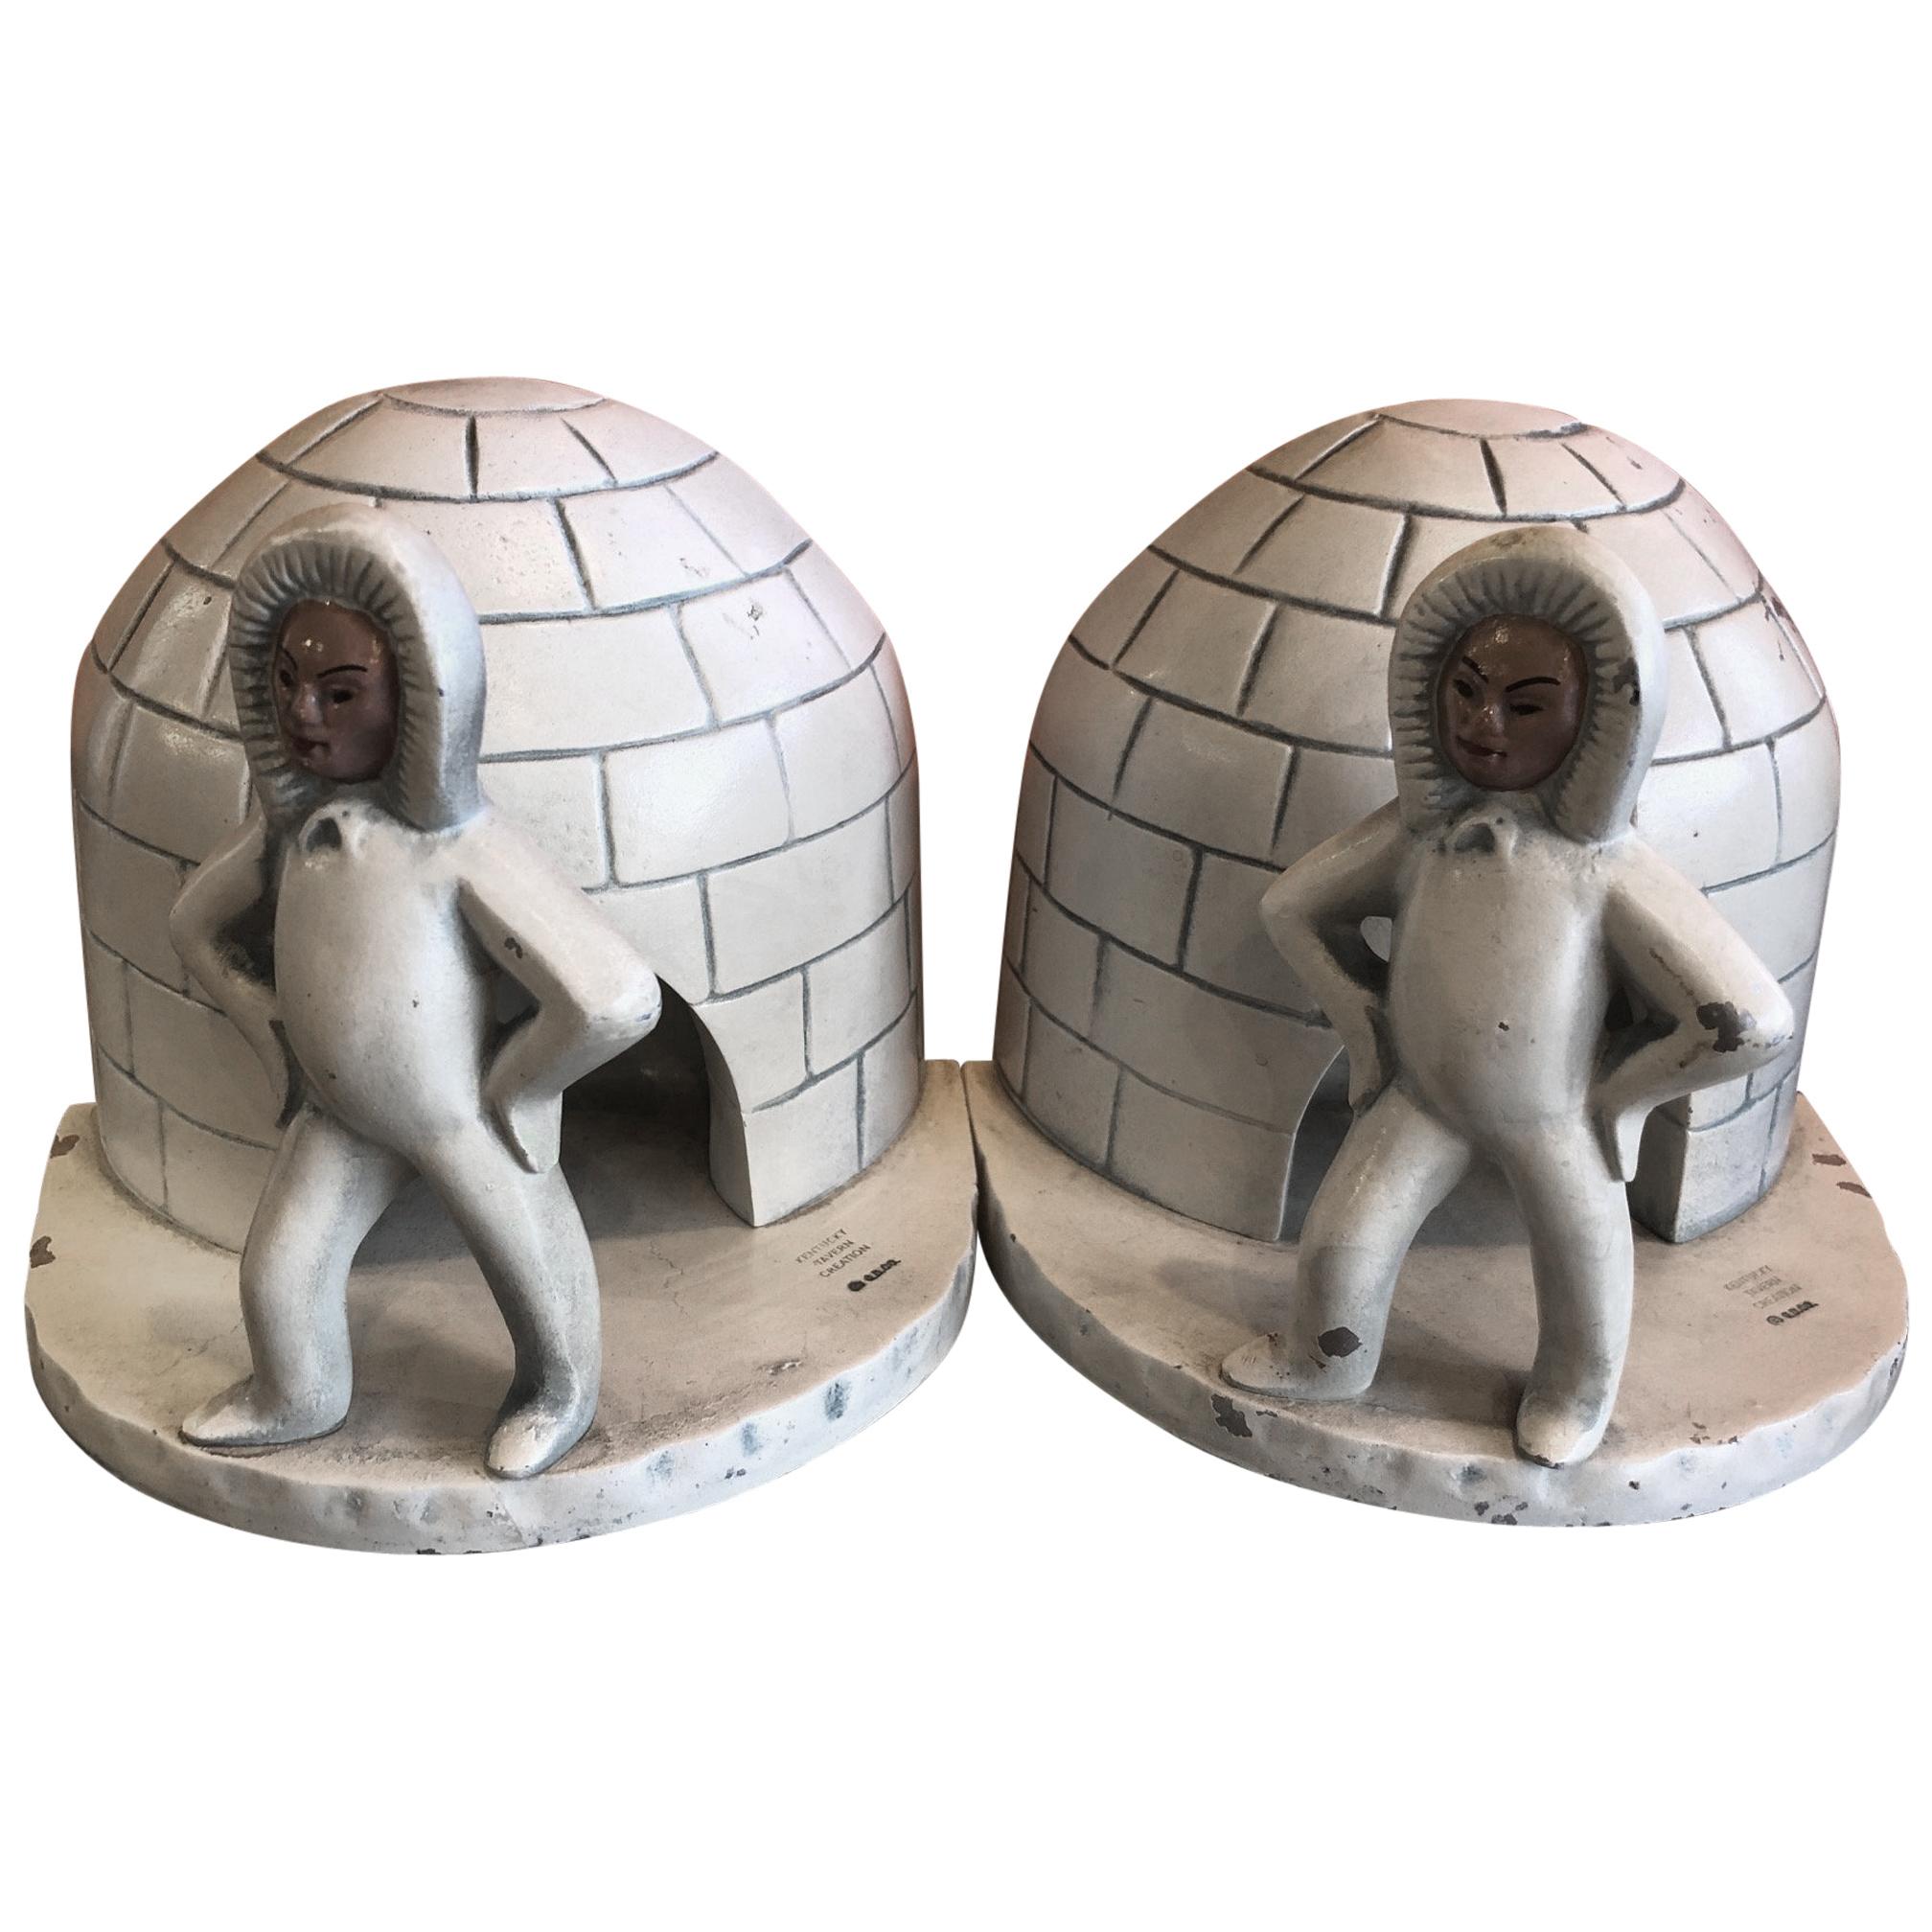 Pair of Aluminum Eskimo / Igloo Bookends by Kentucky Tavern Creations